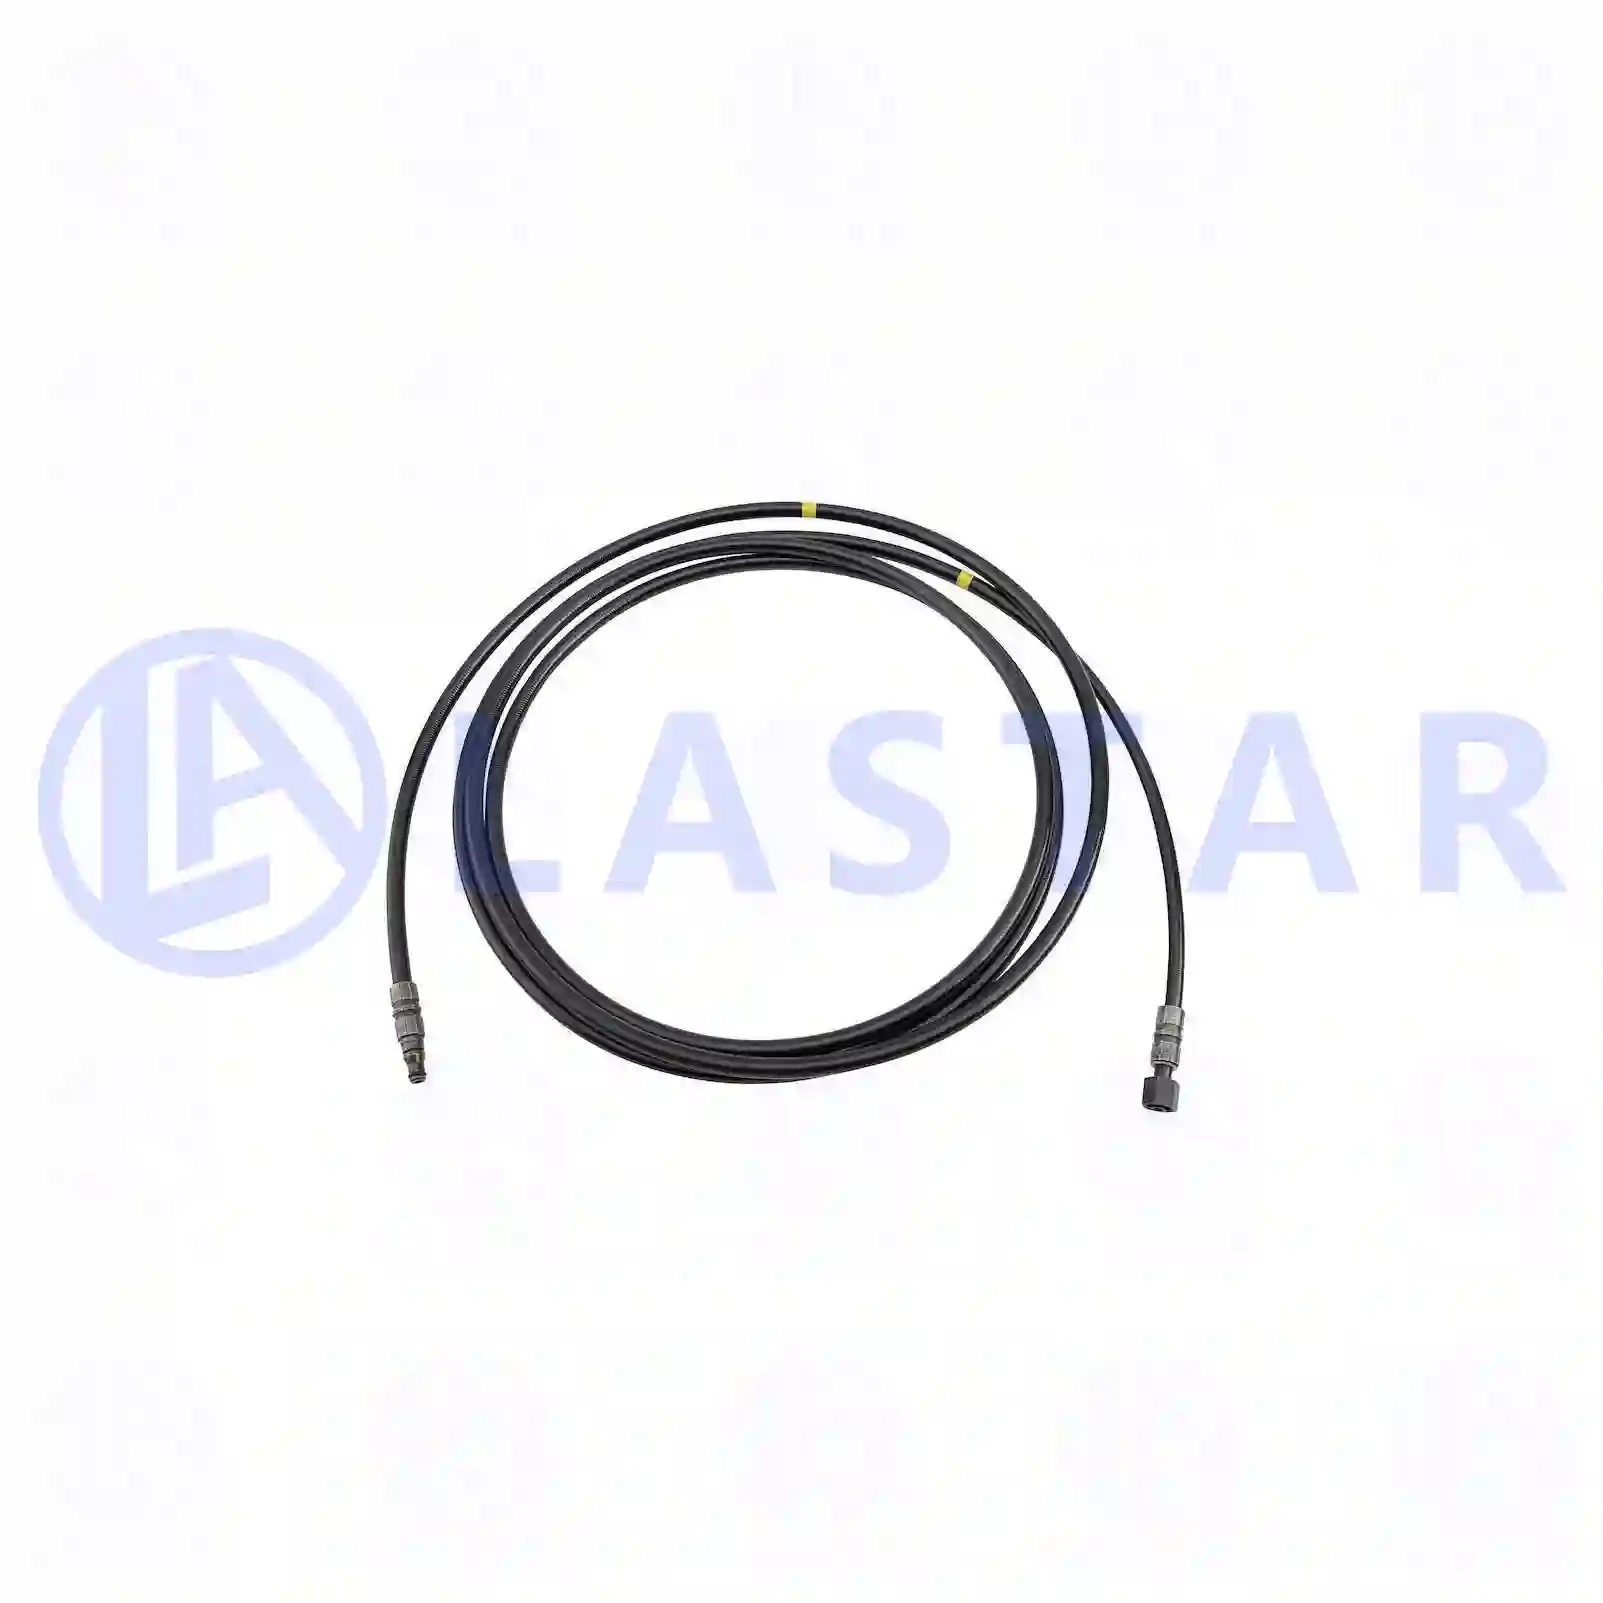 Hydraulic hose, 77722232, 20479961, ZG00275-0008 ||  77722232 Lastar Spare Part | Truck Spare Parts, Auotomotive Spare Parts Hydraulic hose, 77722232, 20479961, ZG00275-0008 ||  77722232 Lastar Spare Part | Truck Spare Parts, Auotomotive Spare Parts